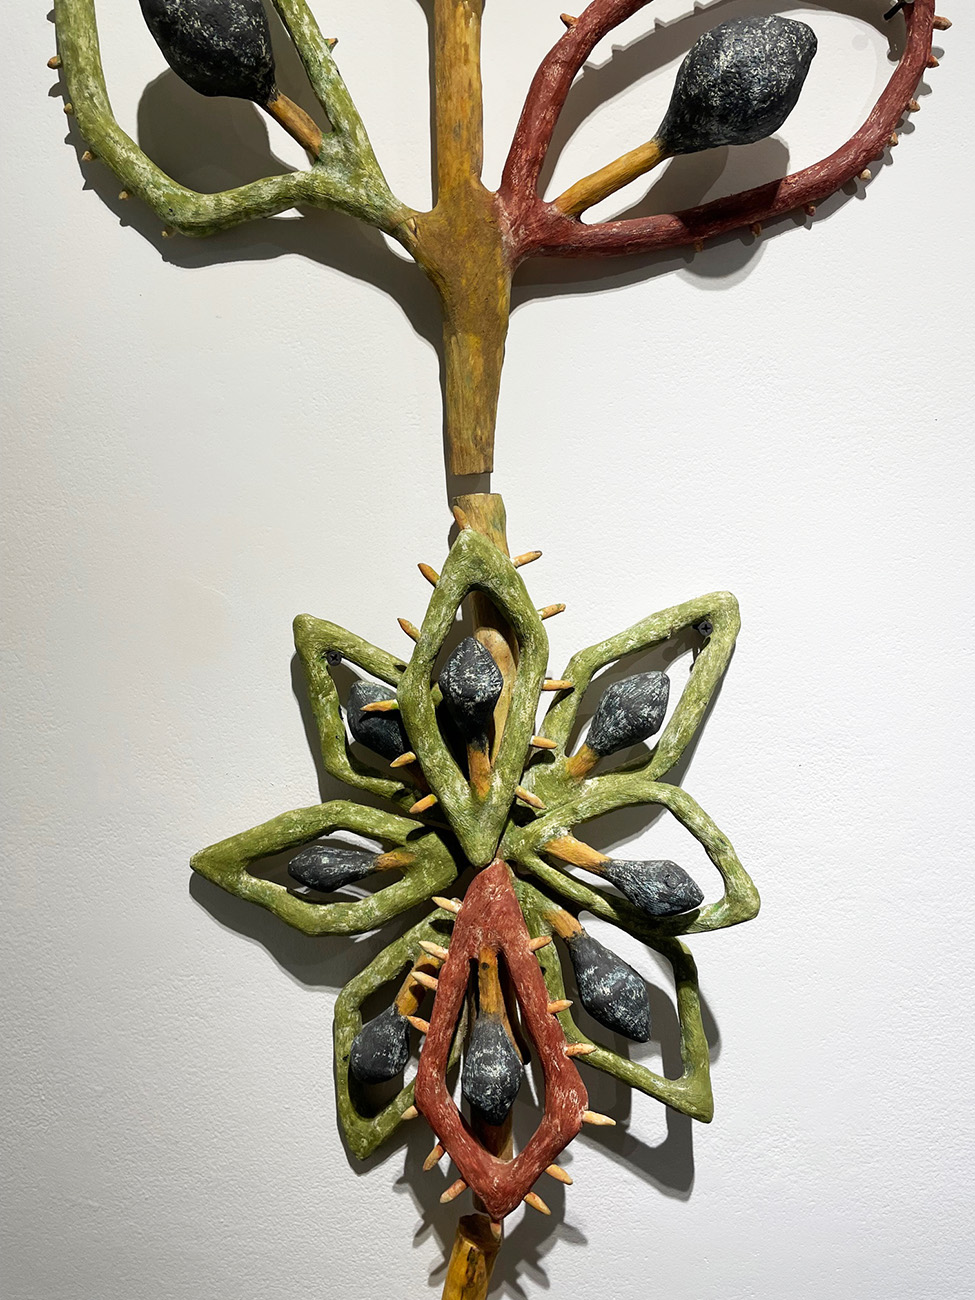 A sculpture of a plant

Description automatically generated